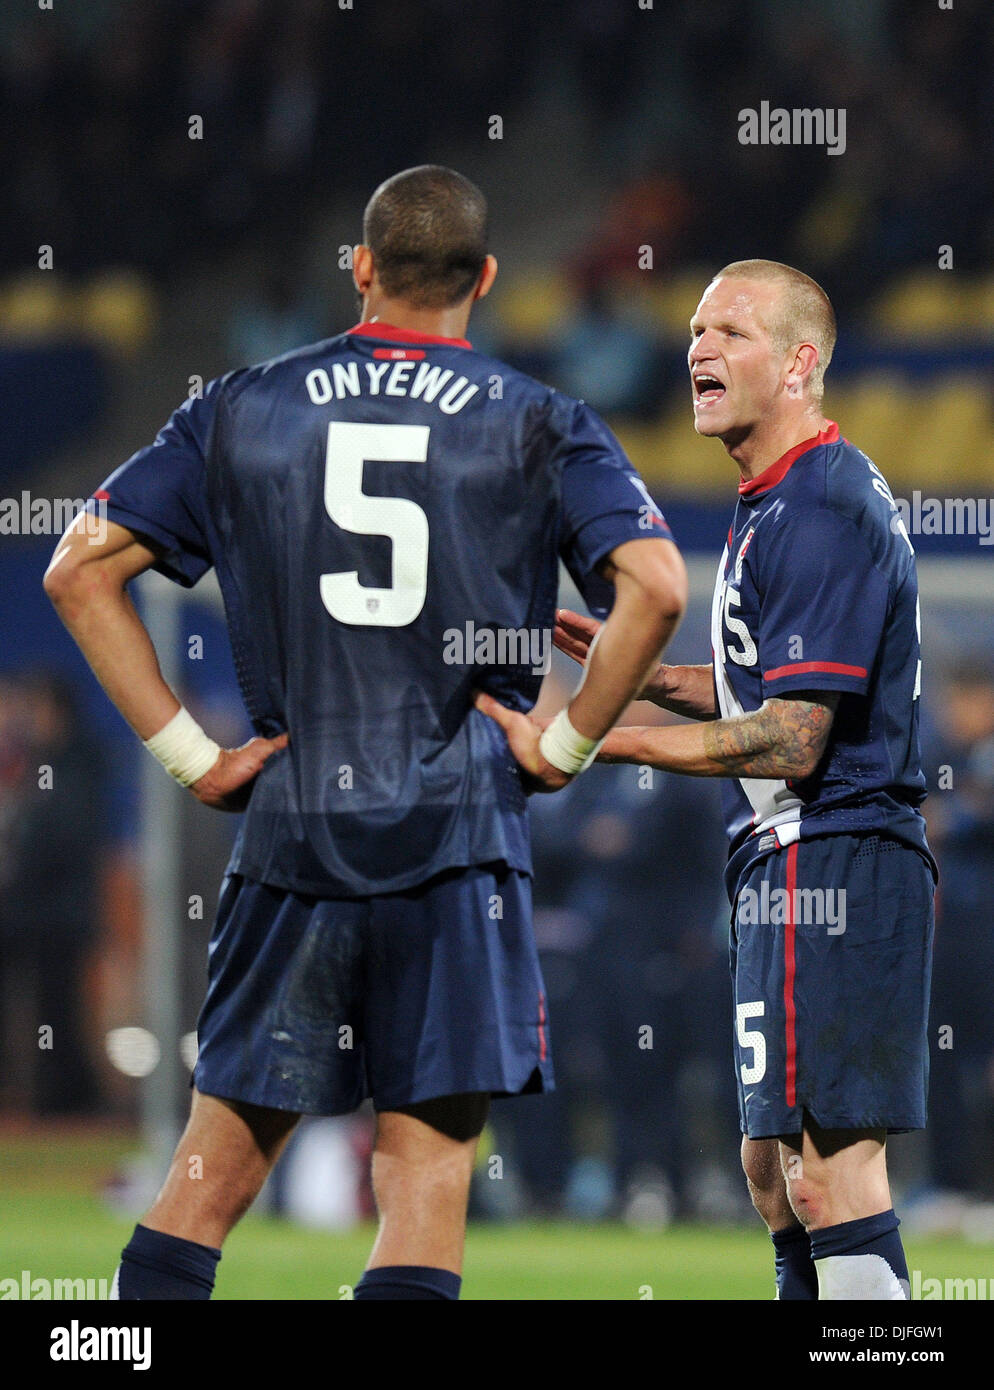 June 12, 2010 - Rustenburg, South Africa - Oguchi Onyewu and Jay DeMerit of USA are seen during a FIFA World Cup 2010 football match between England and USA at the Royal Bafokeng Stadium.  (Credit: © Luca Ghidoni/ZUMApress.com) Stock Photo